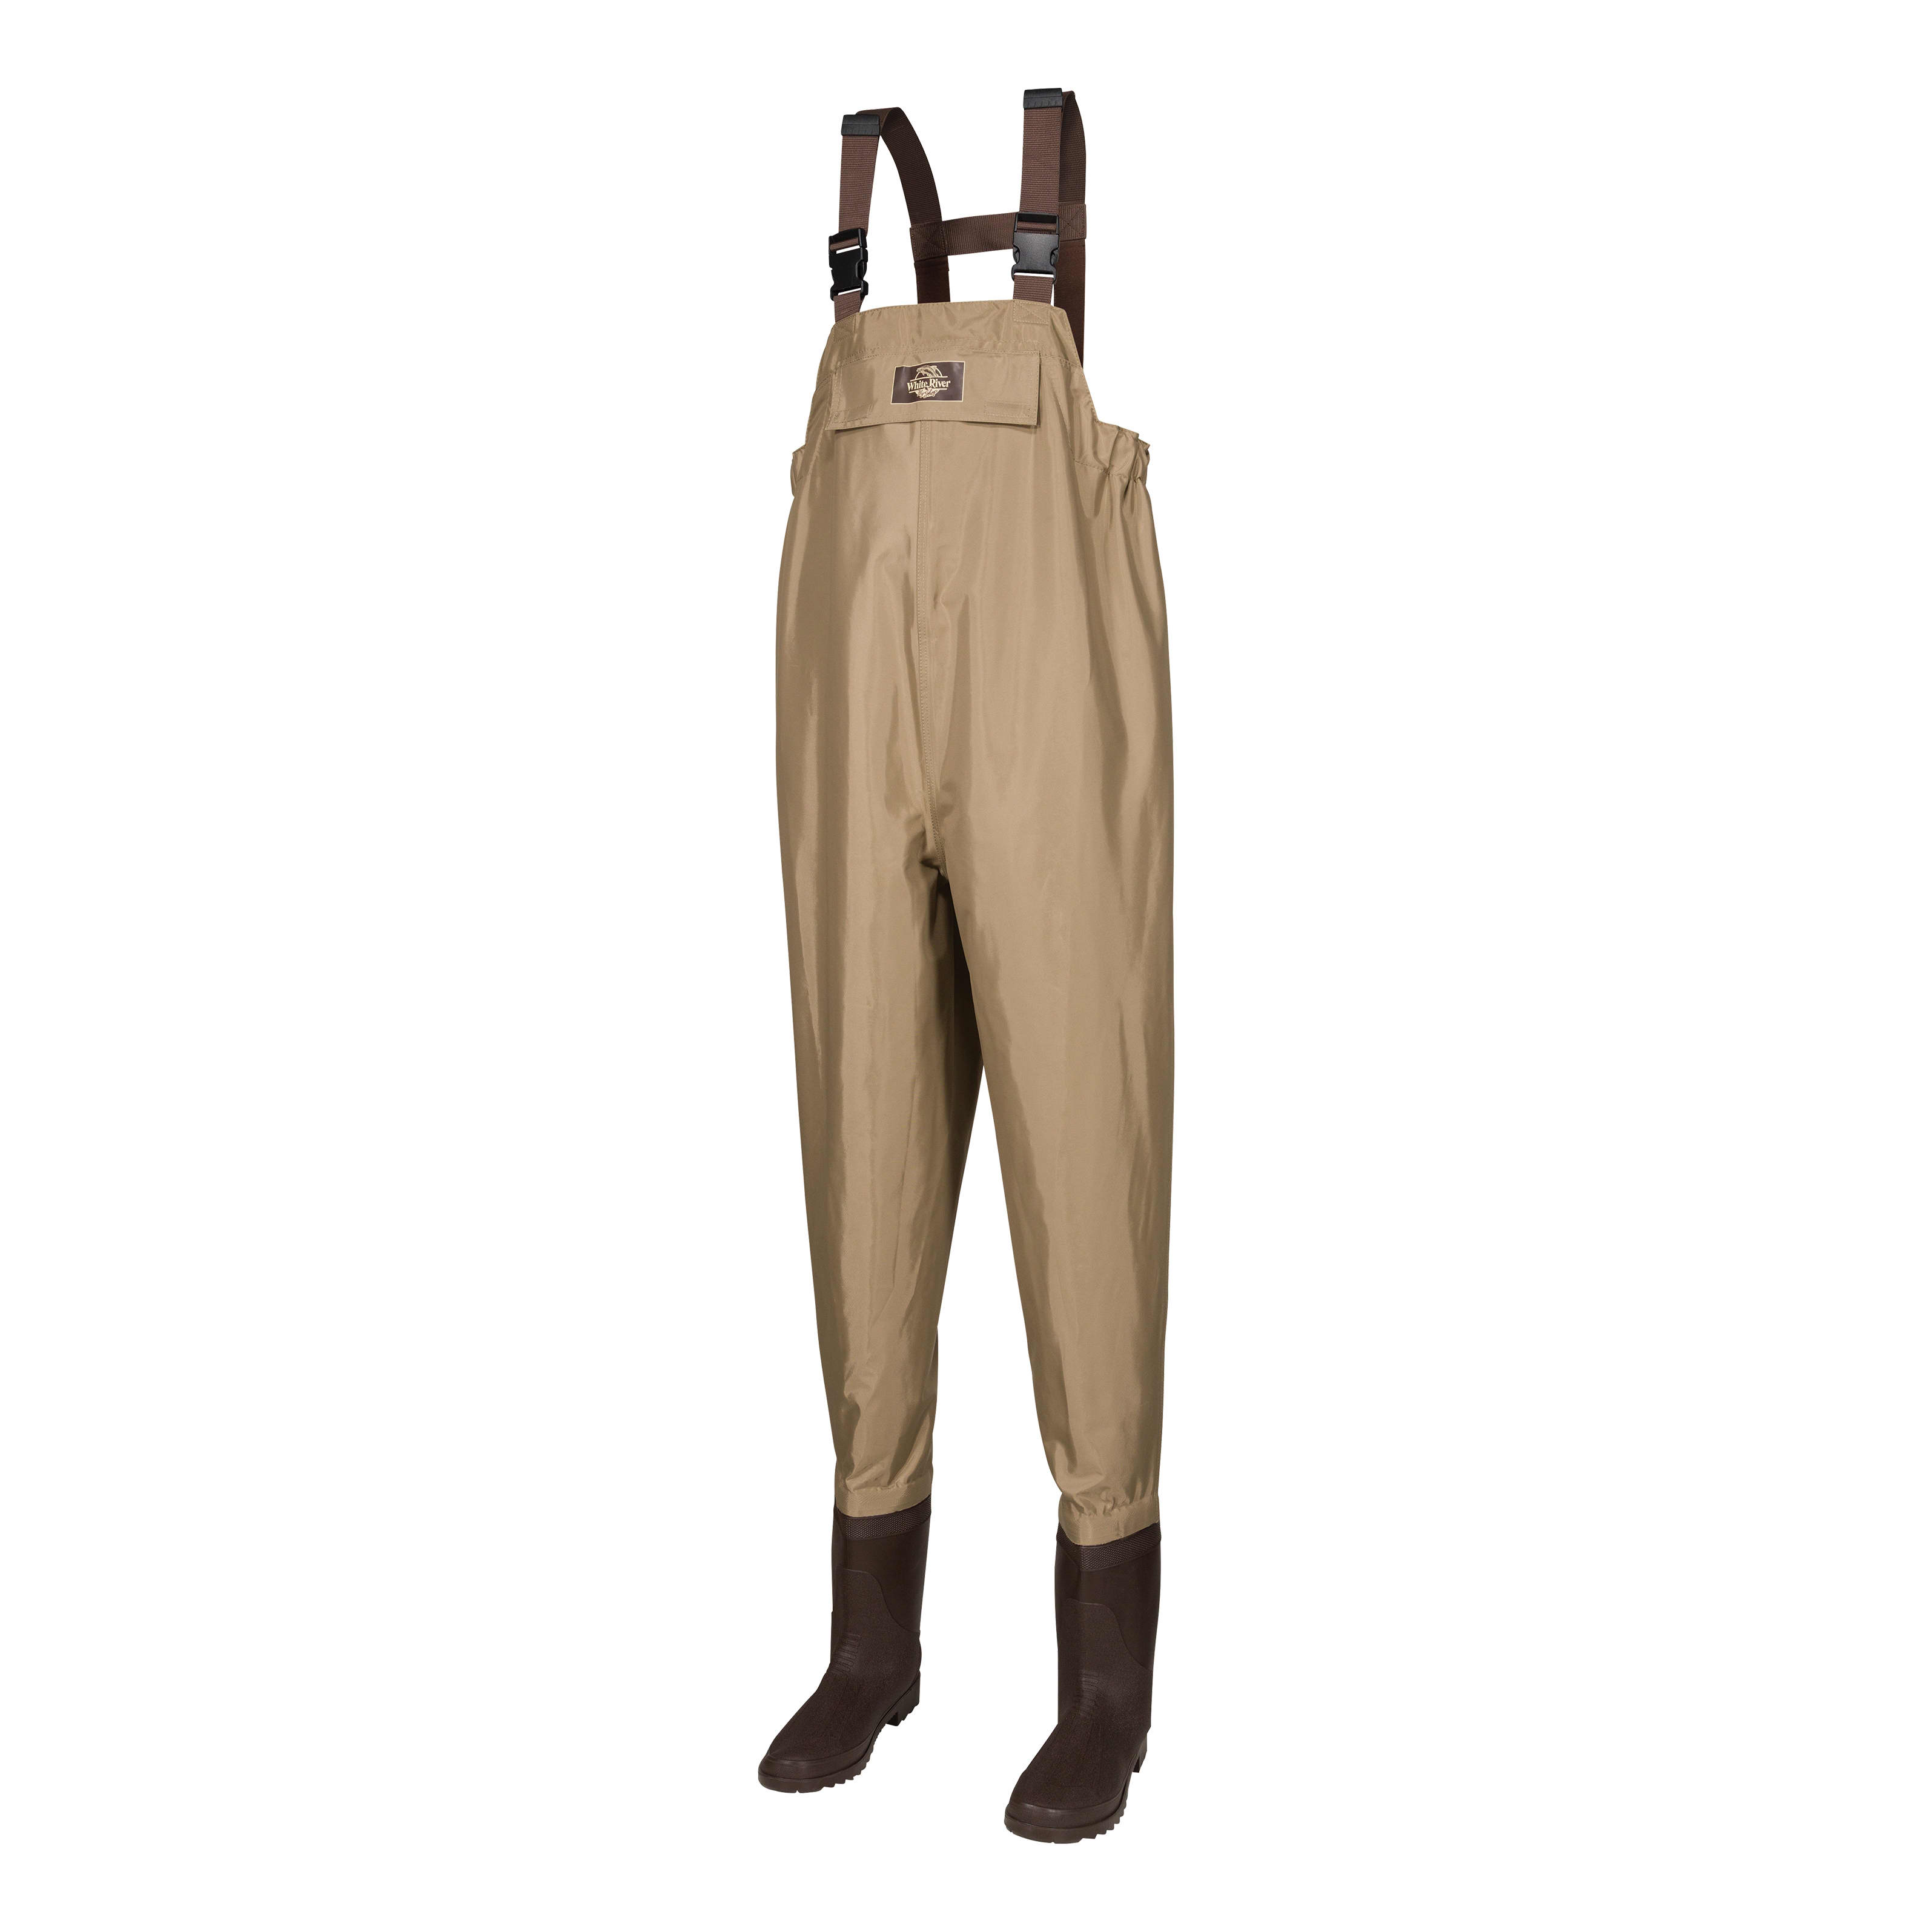 White River Fly Shop Men’s Three Forks Stocking-Foot Chest Waders 